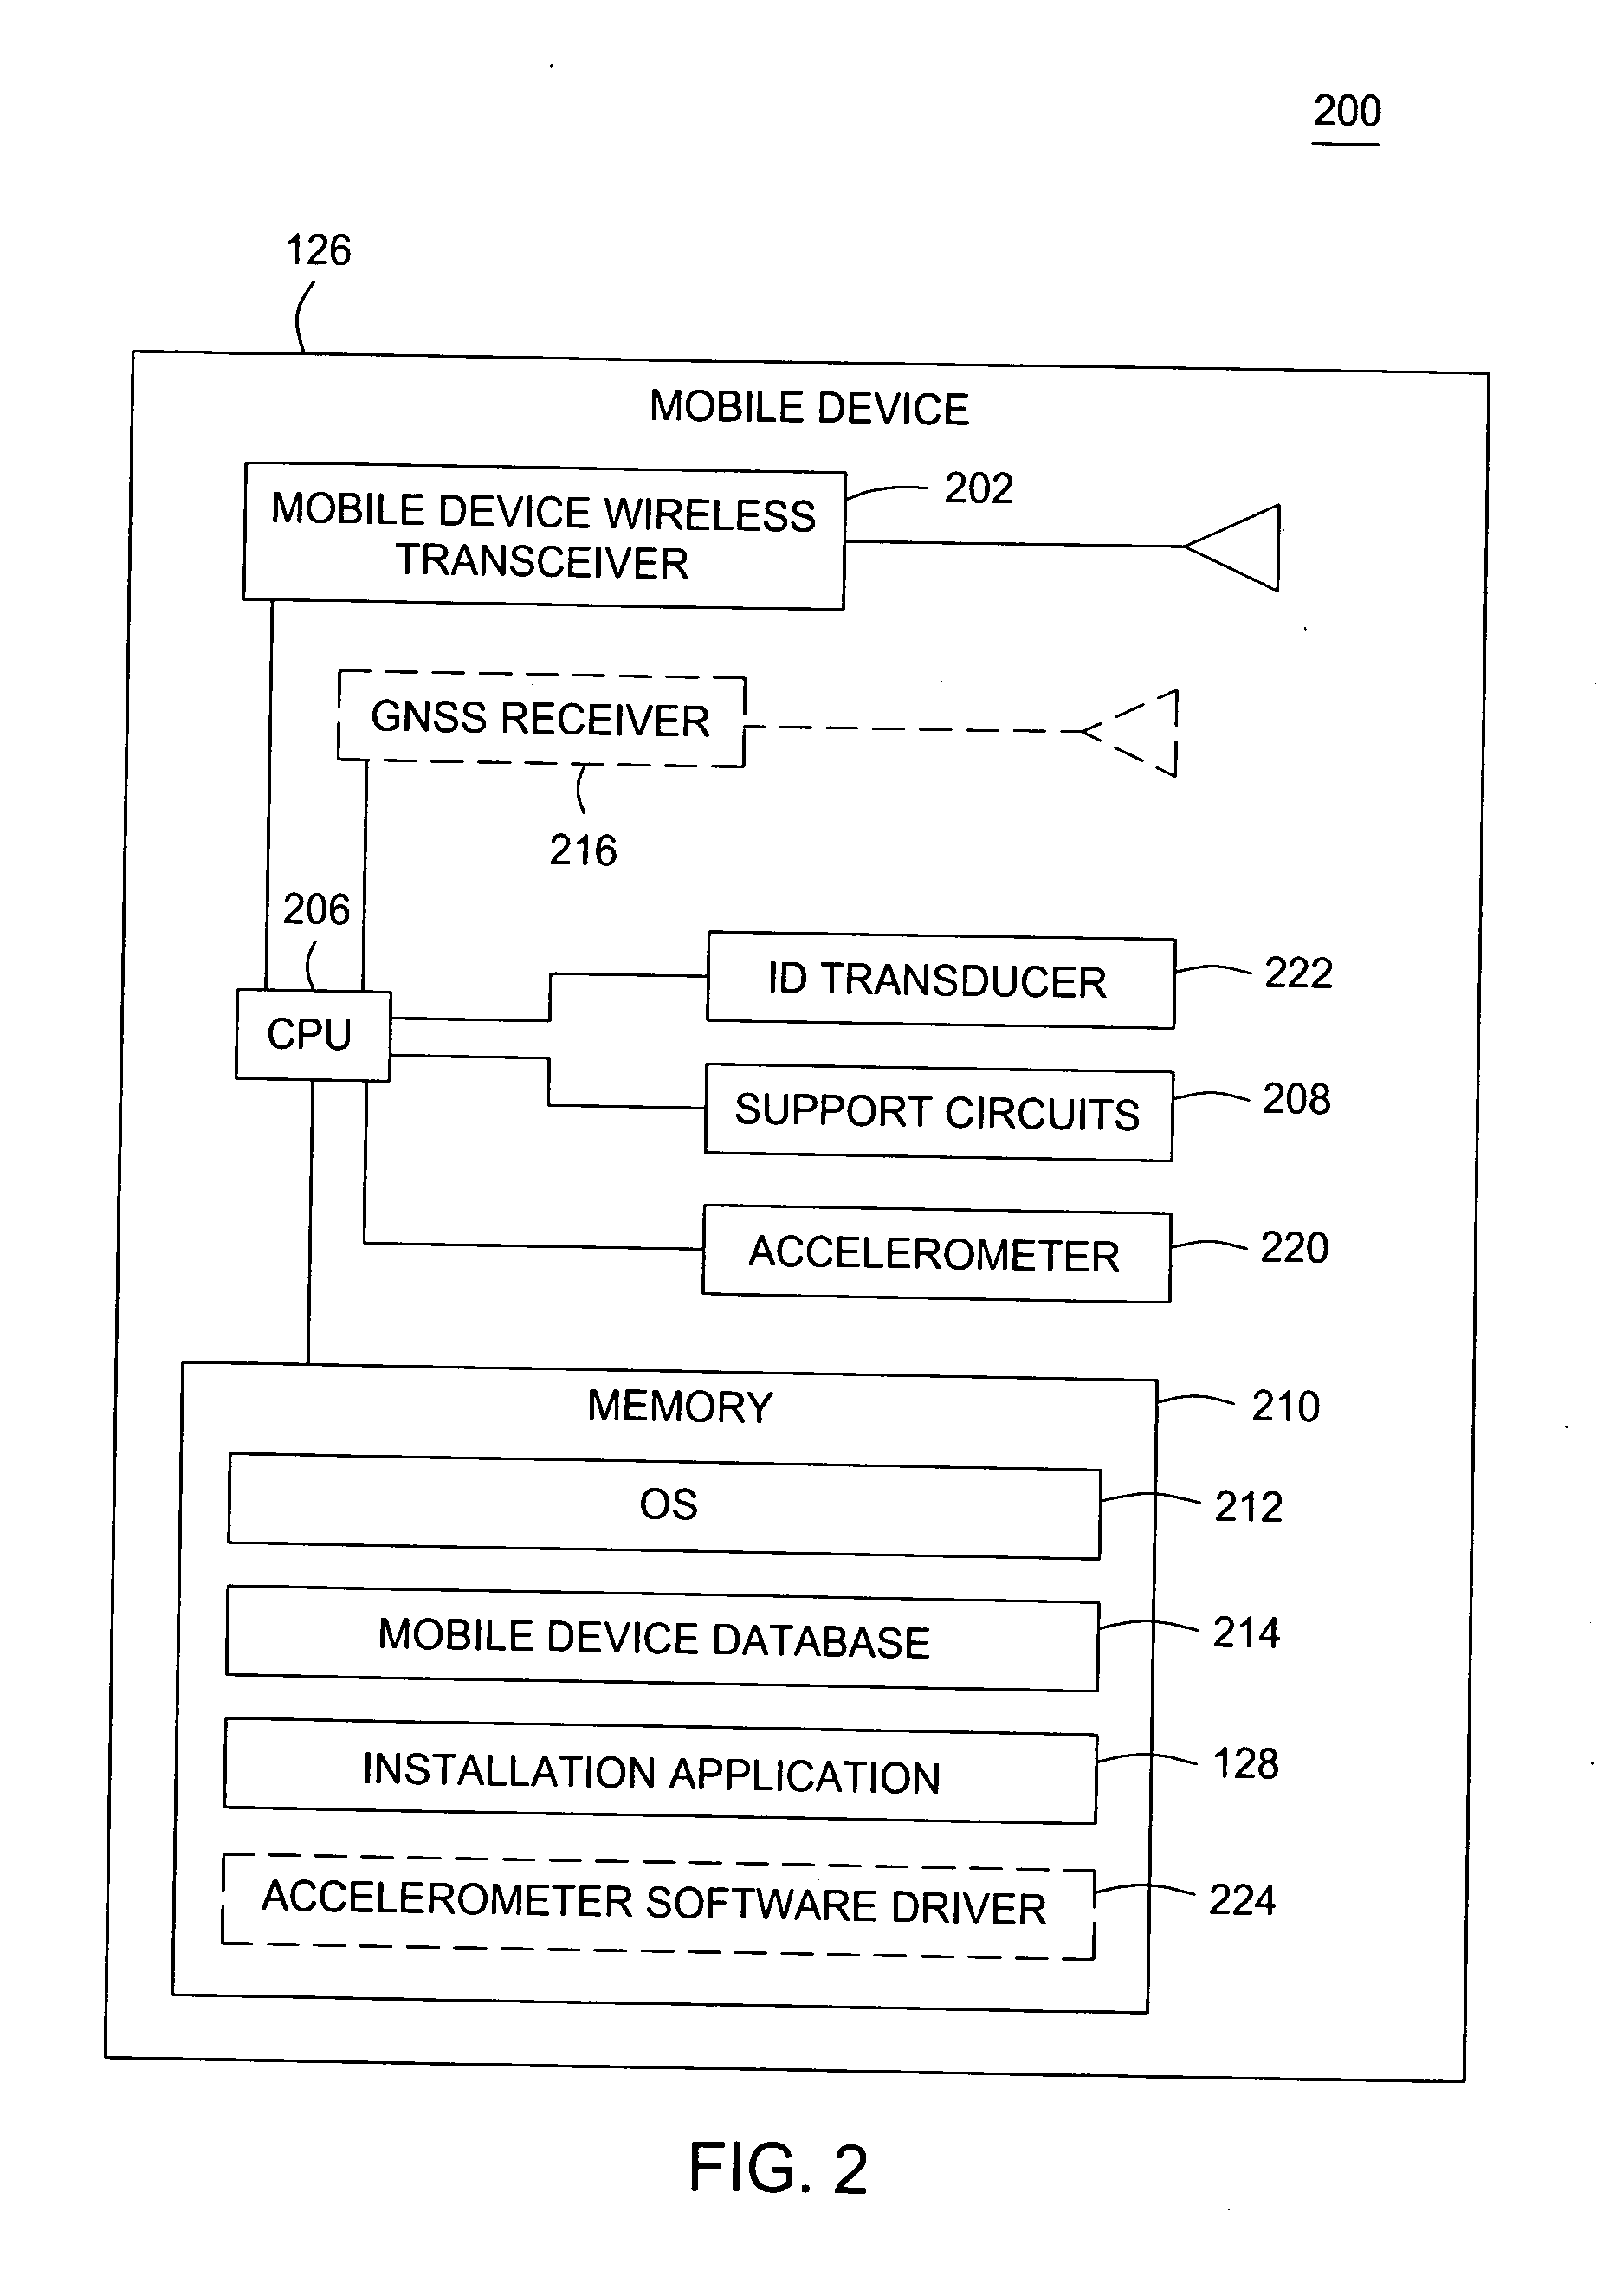 Method and apparatus for managing installation information